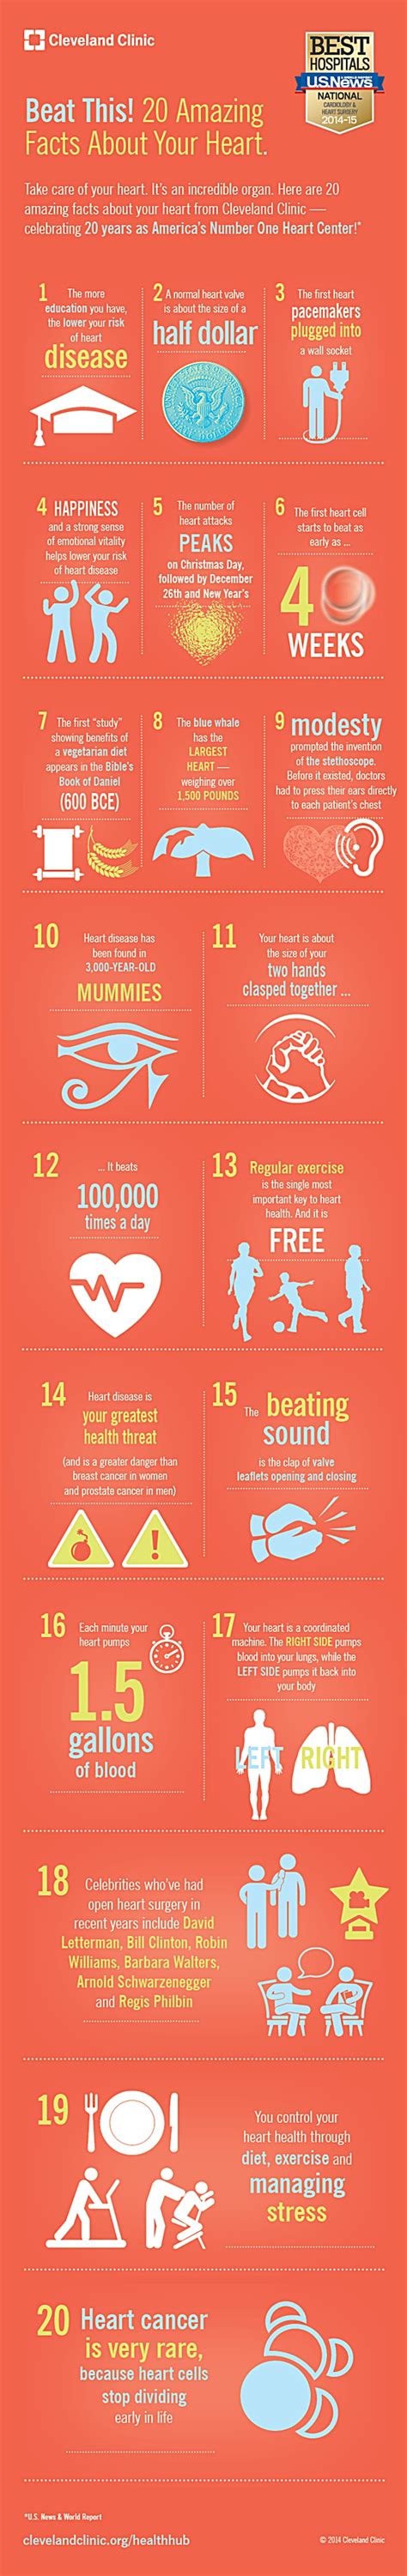 20 Amazing Facts About Your Heart Health24